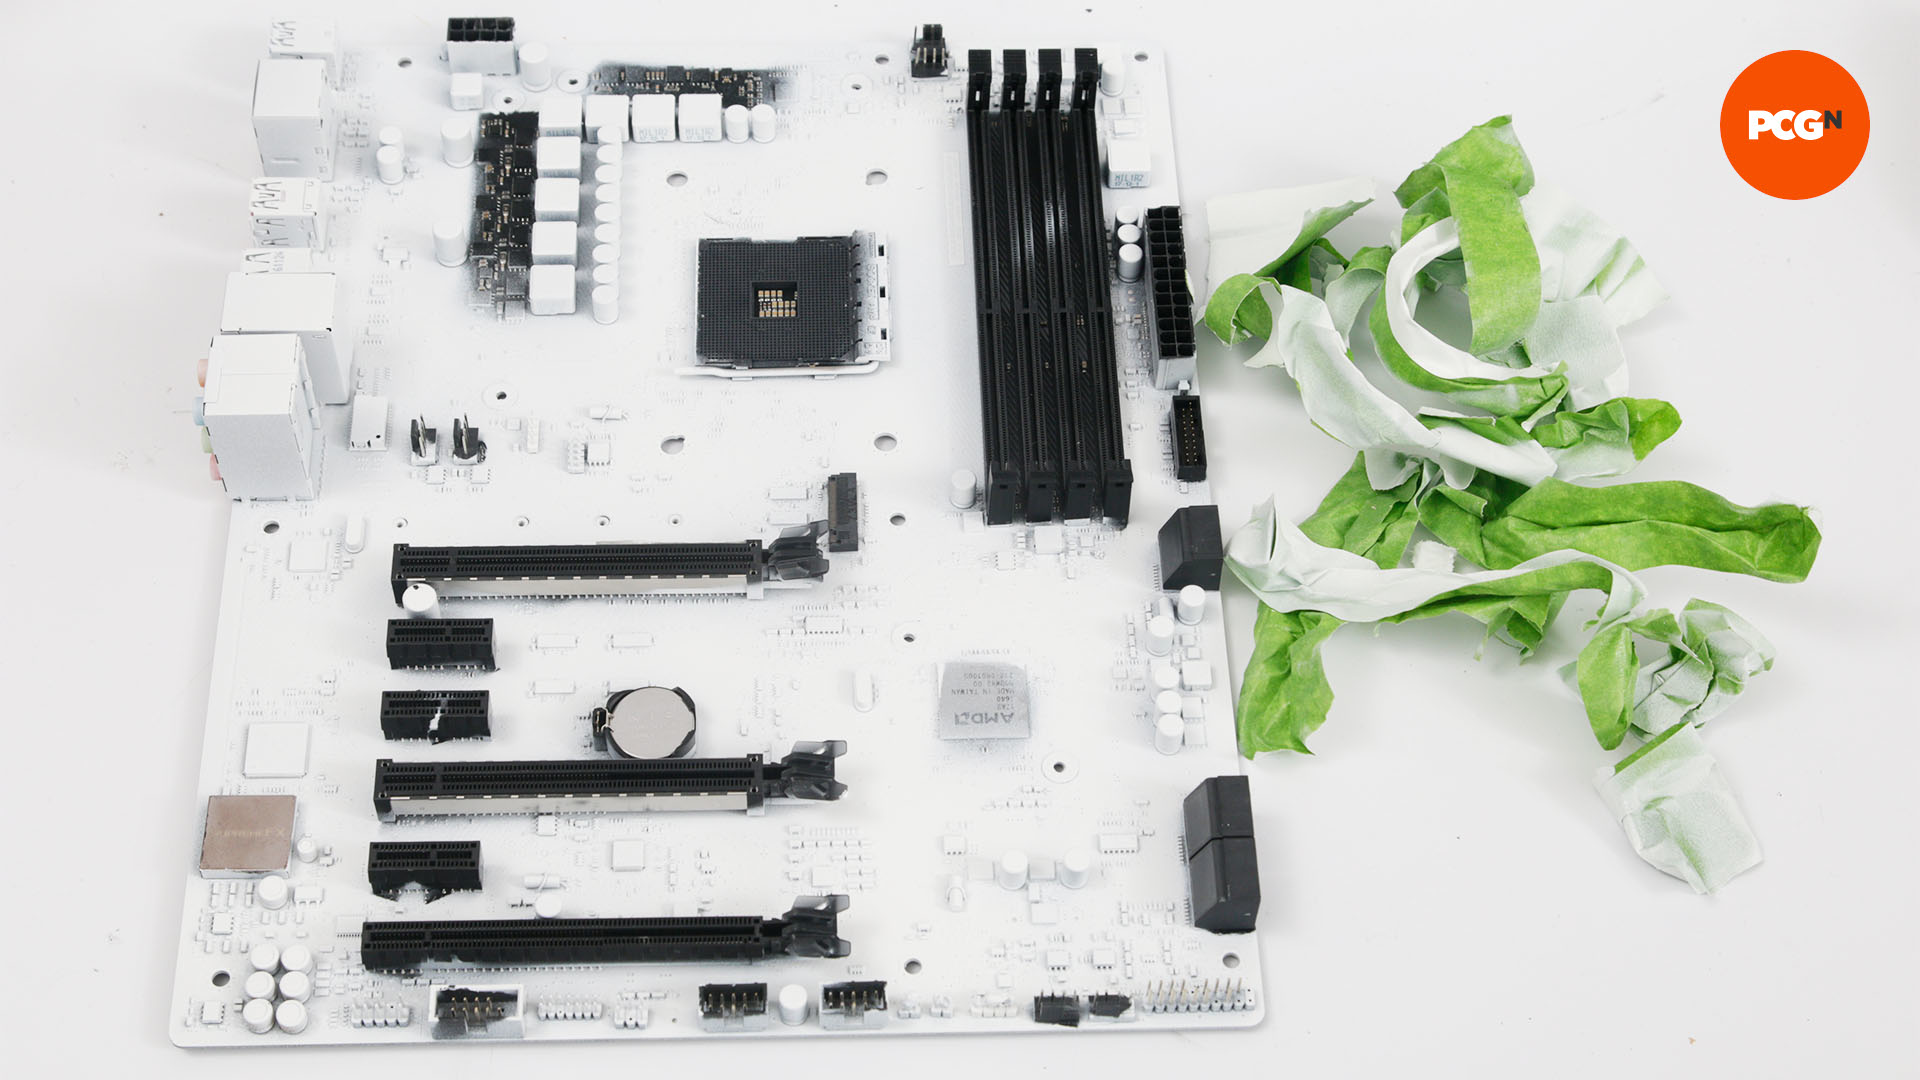 The masking tape is removed from the freshly painted white motherboard